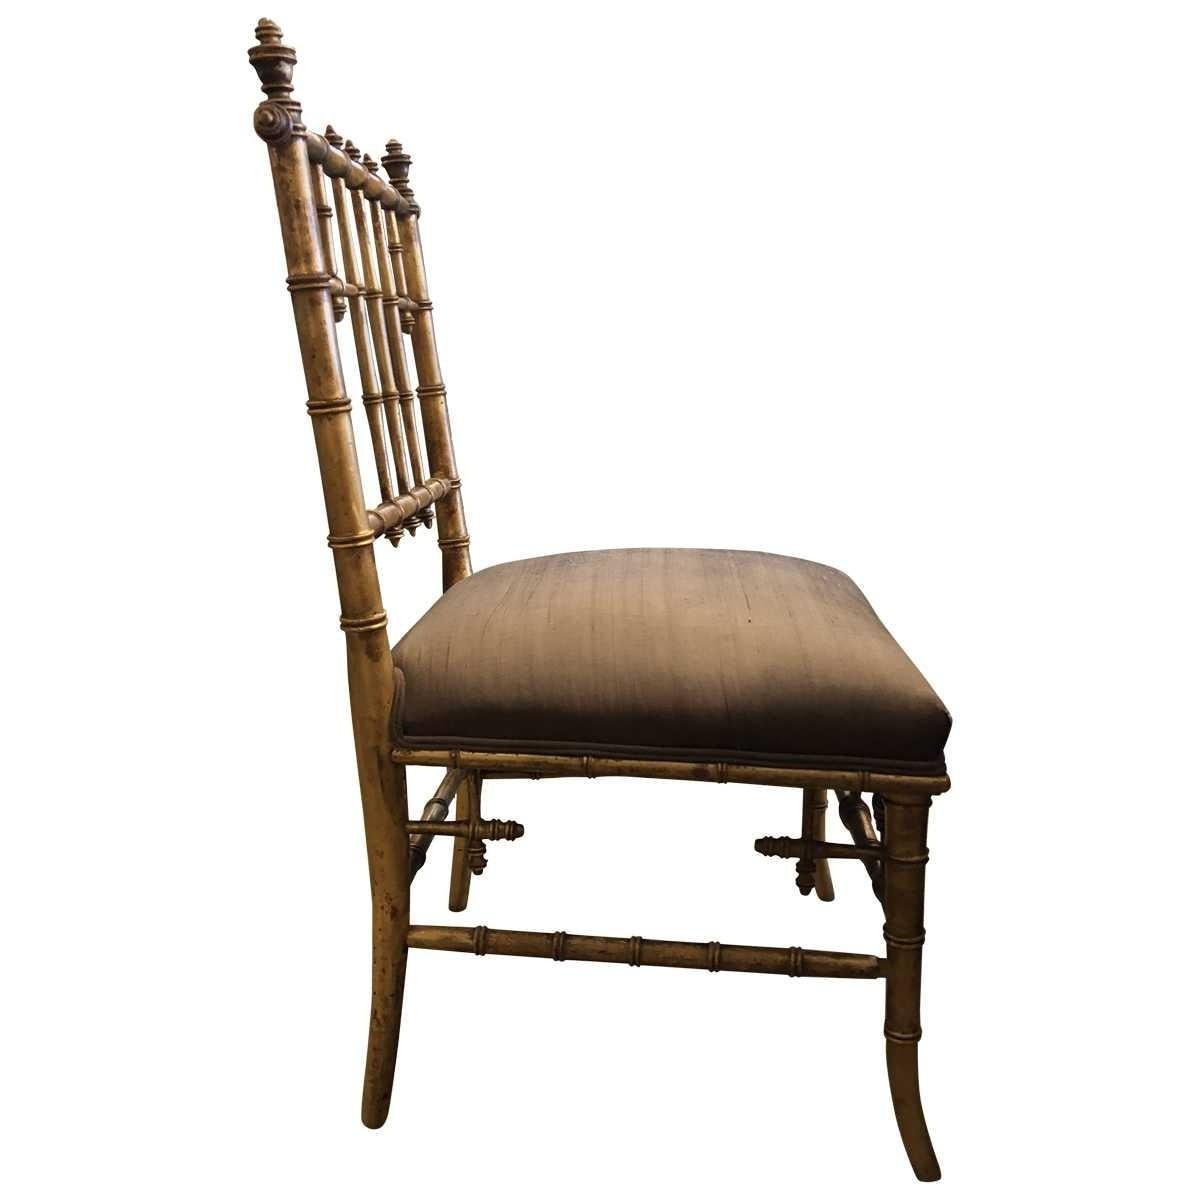 This bamboo chair it is an elegant style, characterized by ornate carvings, dark woods, and heavy luxurious fabrics.
Materials: Giltwood, fabric
Dimensions:
Width 17.50